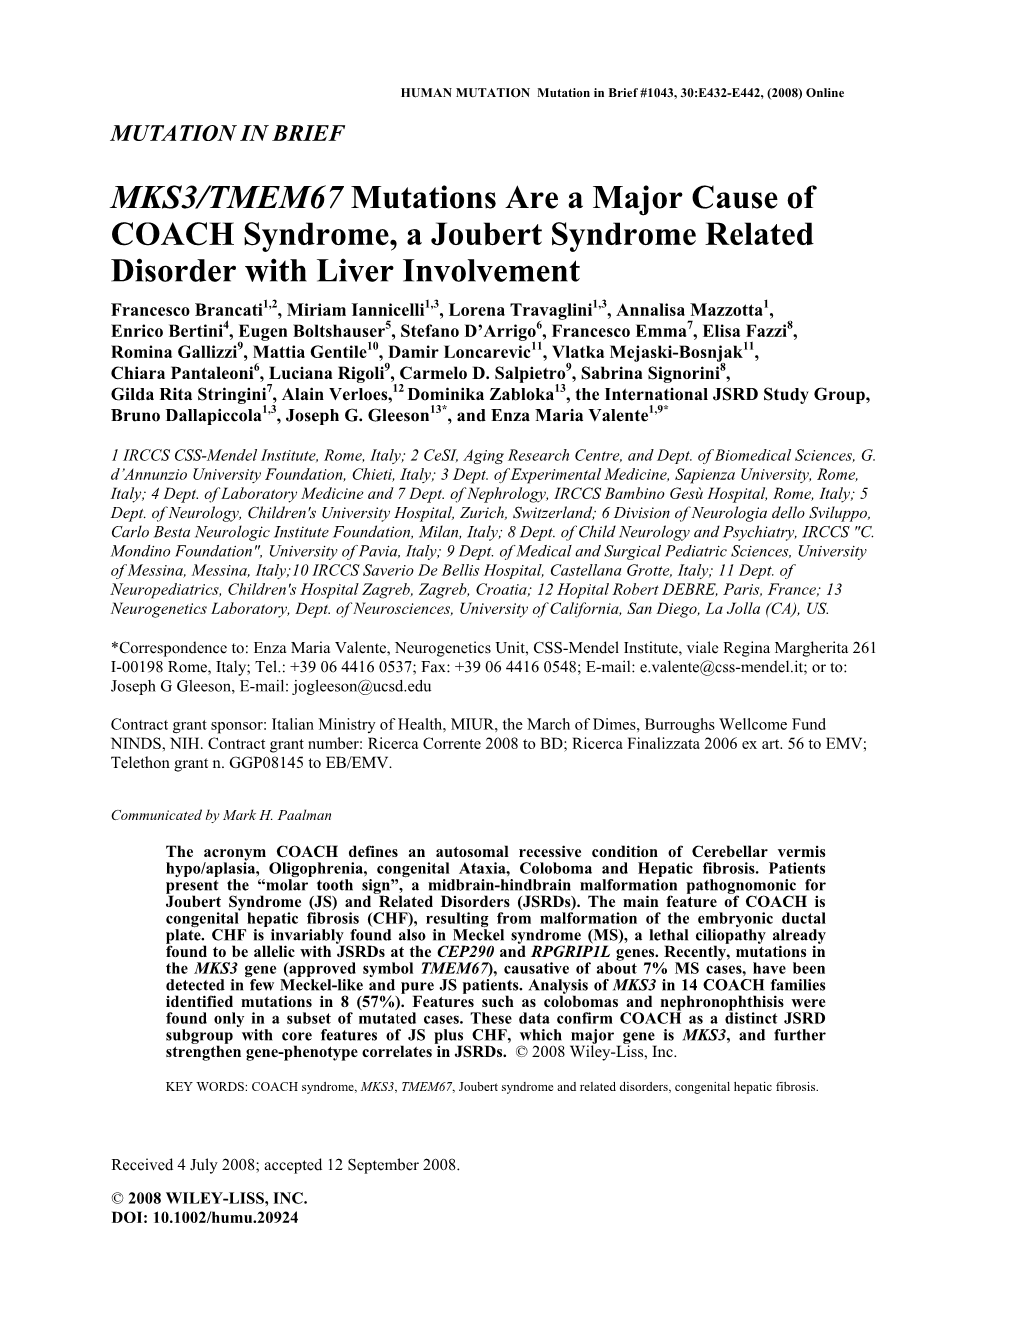 MKS3/TMEM67 Mutations Are a Major Cause of COACH Syndrome, A